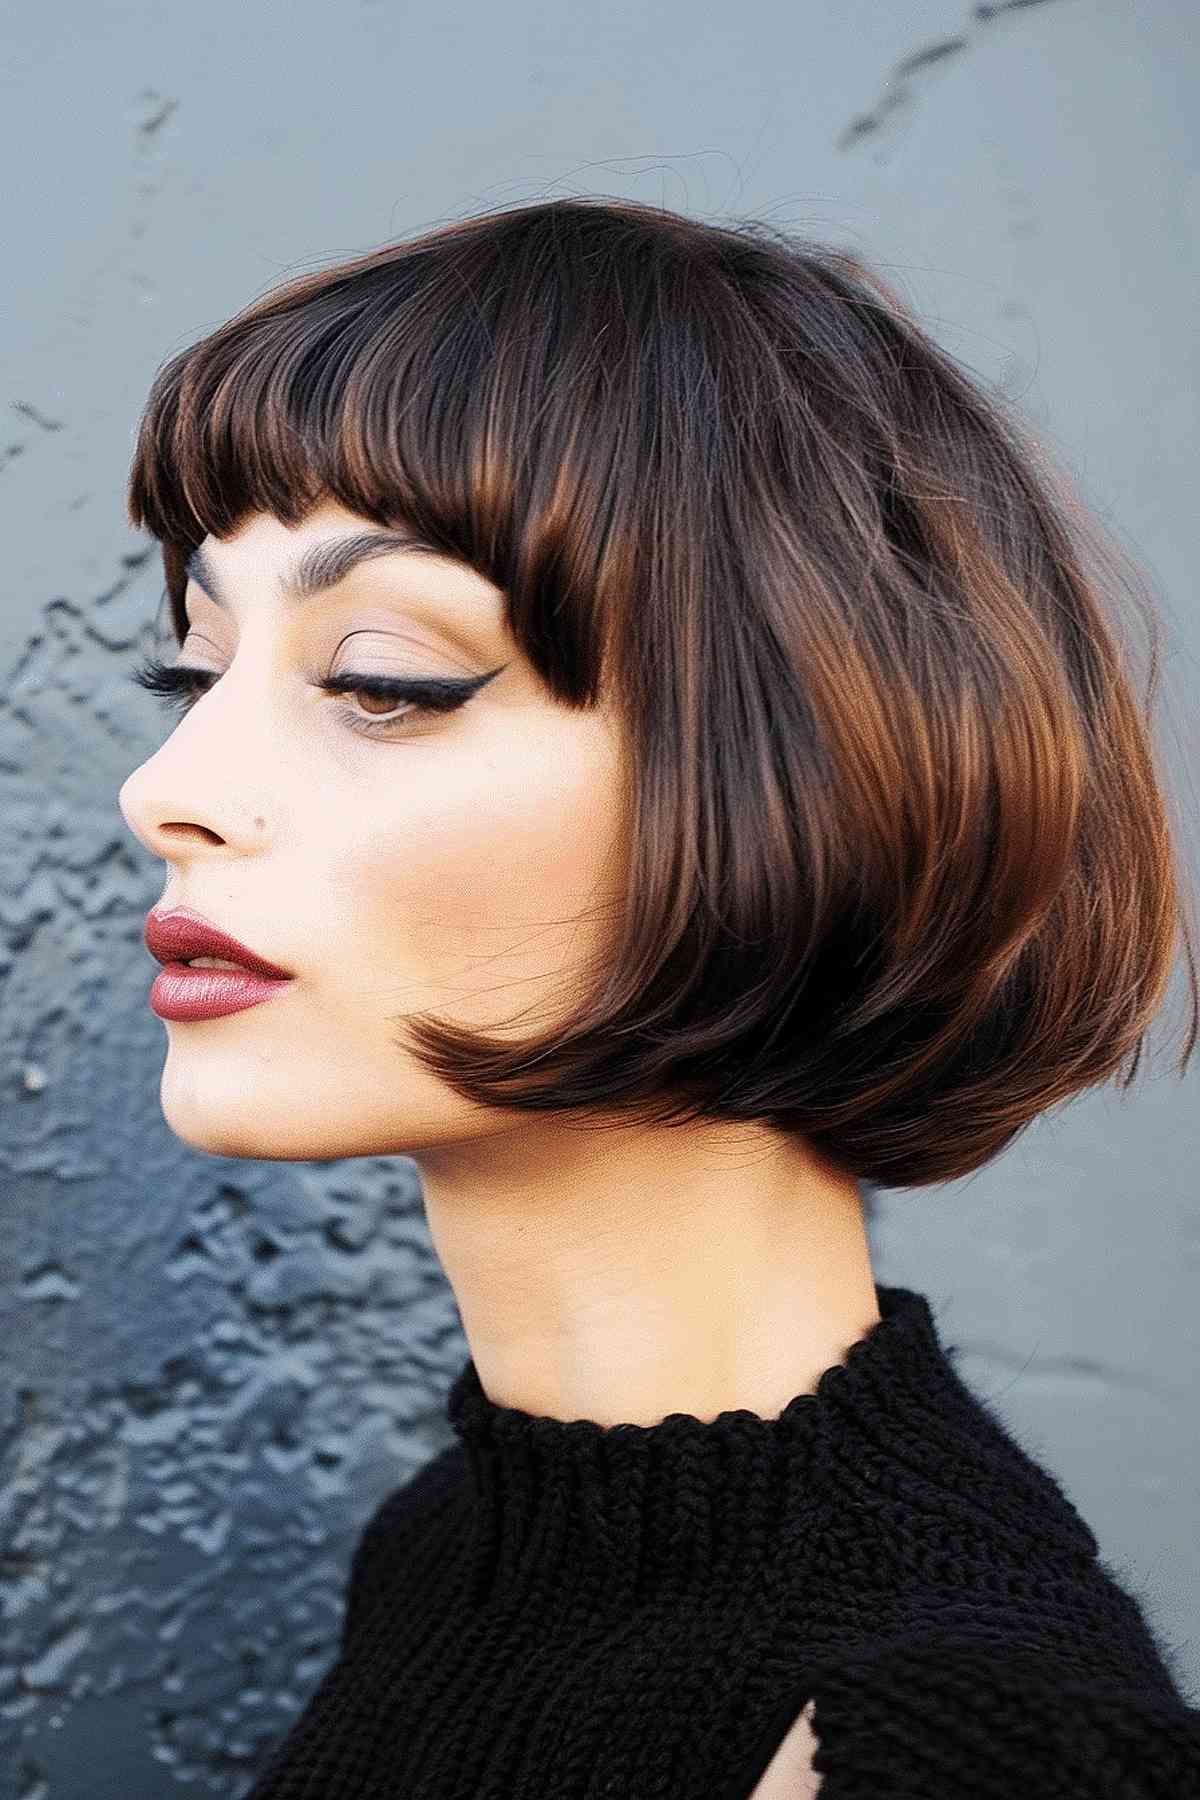 Structured Chanel bob with distinctive, straight-across bangs and a rounded silhouette.